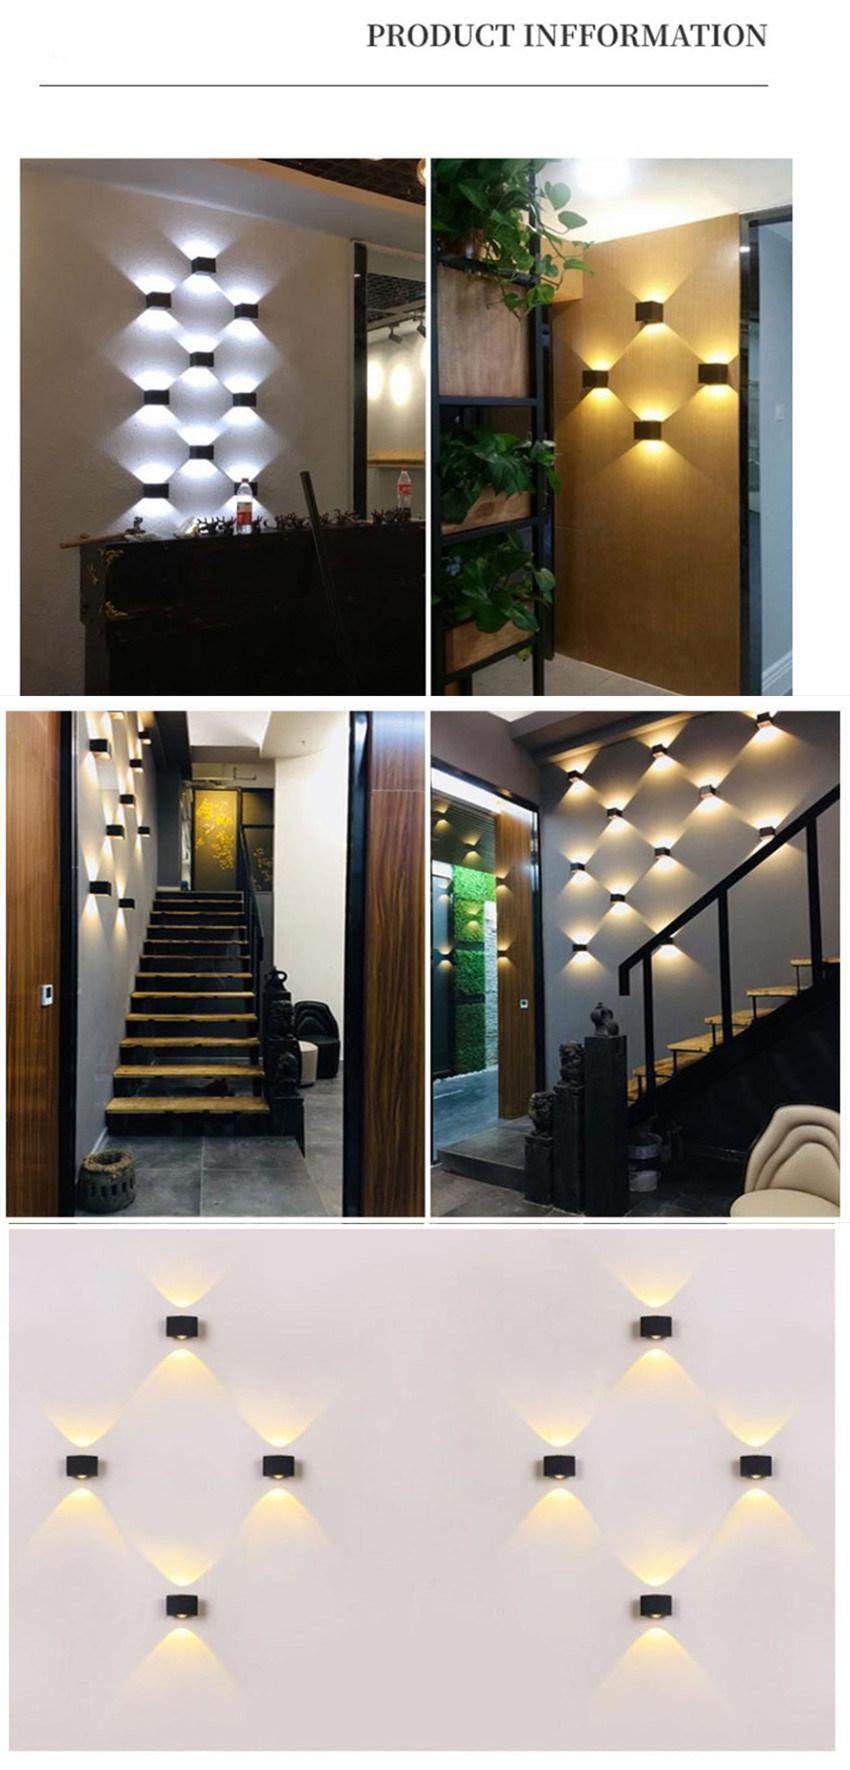 Spotlight Black LED Wall Lamp for Indoor Outdoor Decoration